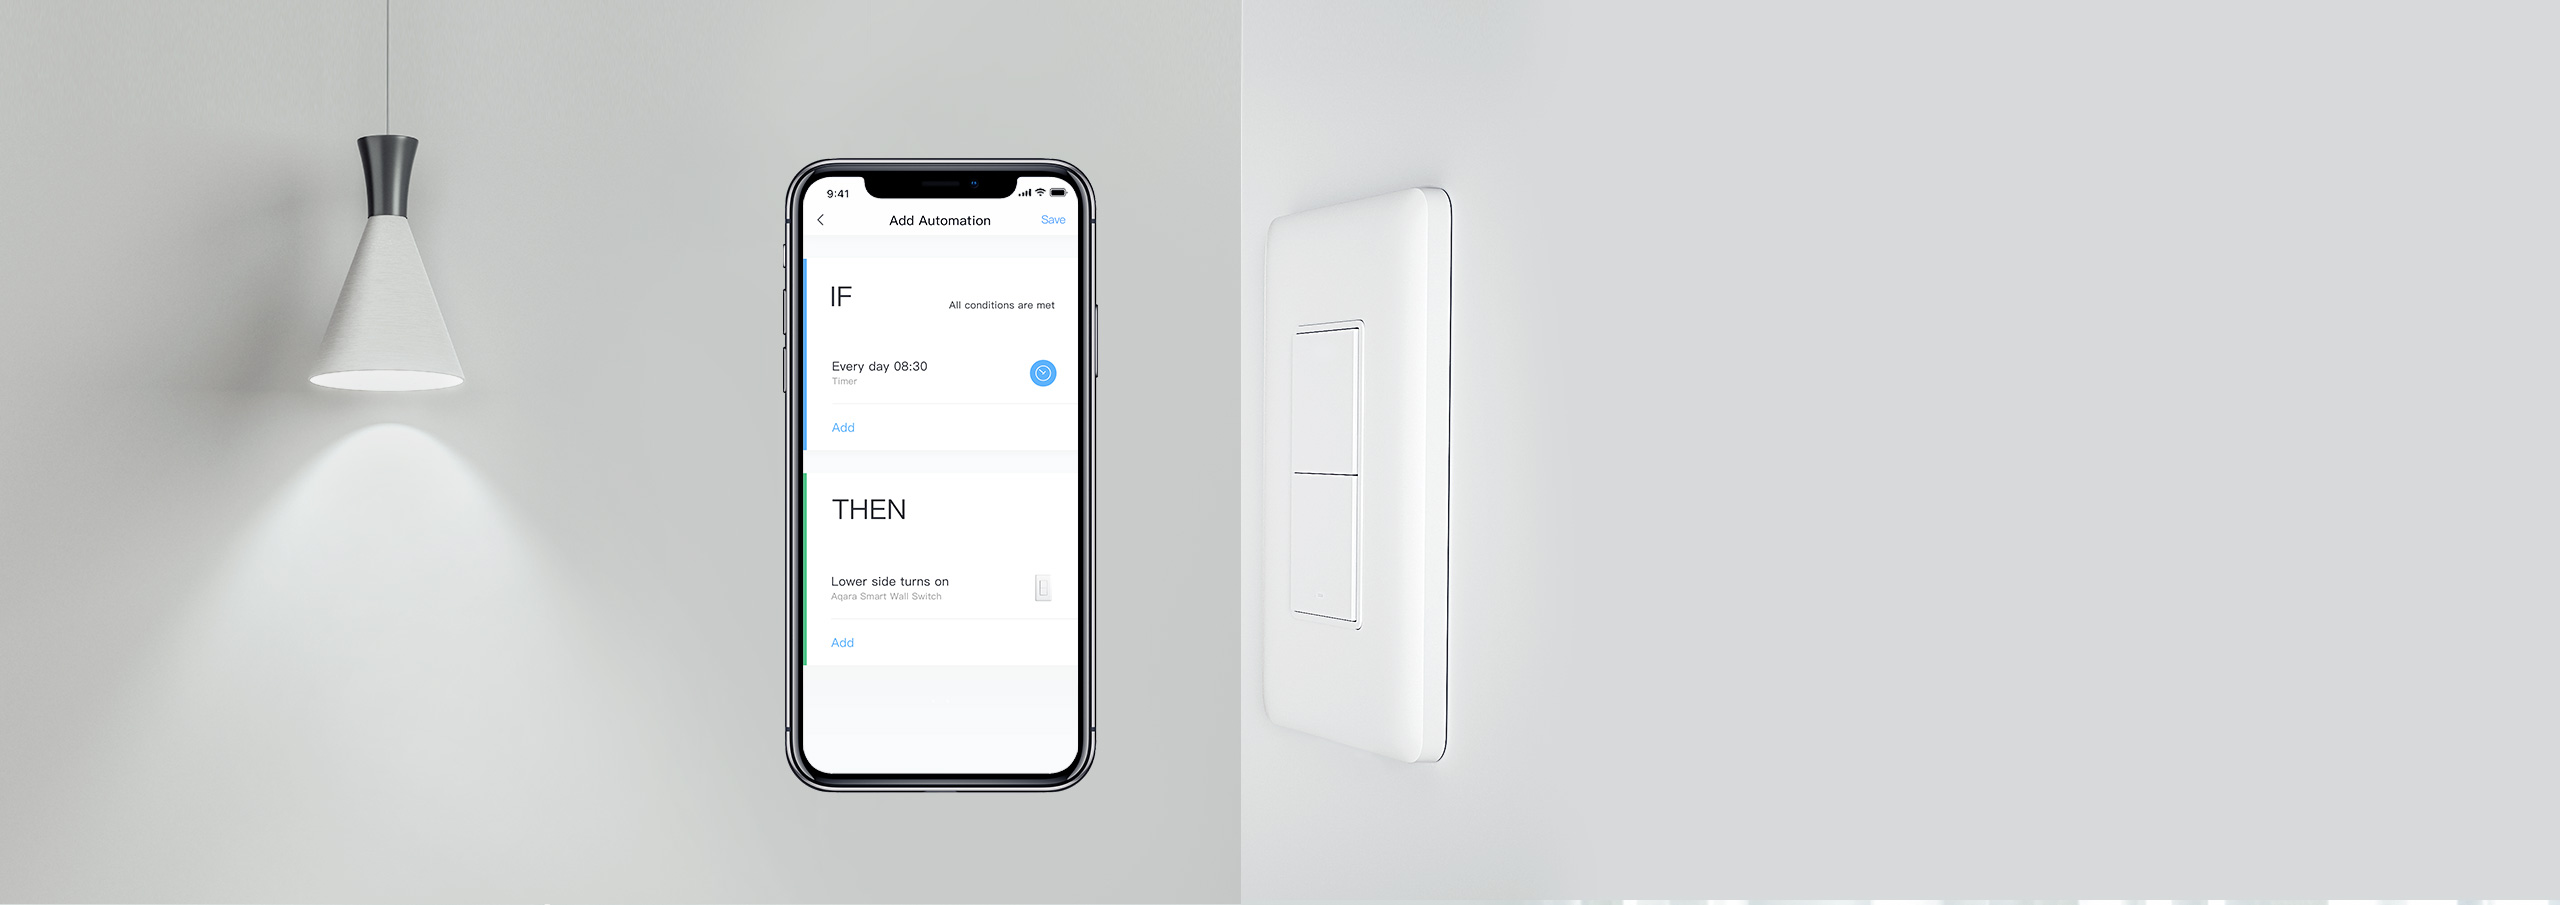 Set smart switch's timers in order to turn on/off automatically lights